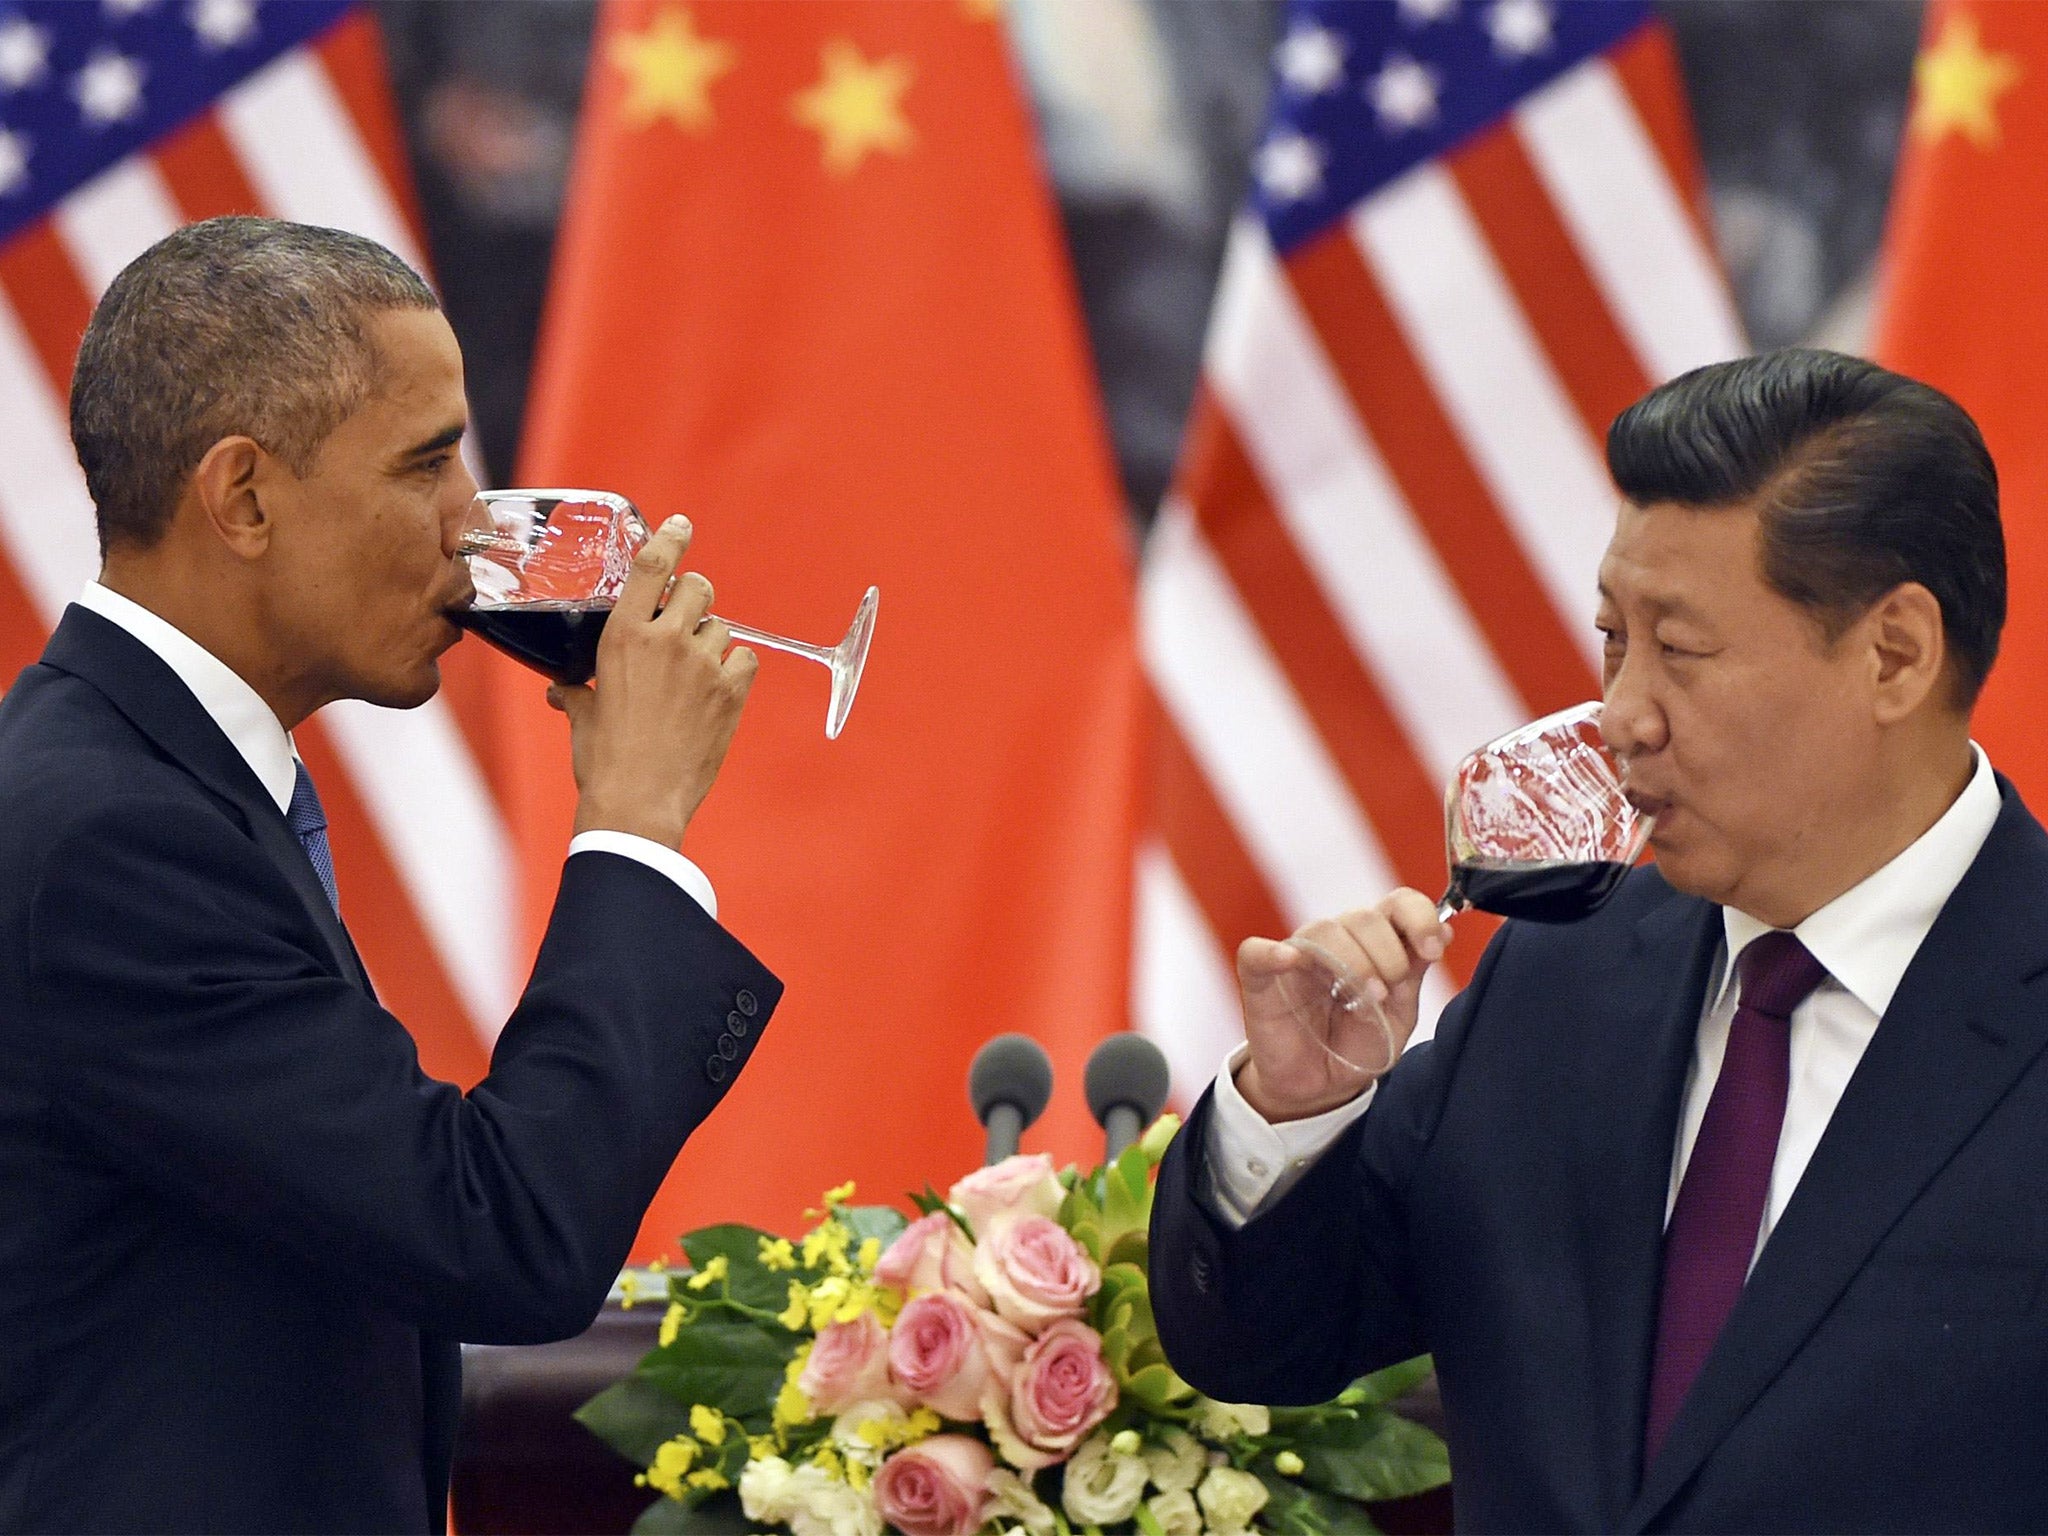 US President Barack Obama and Chinese President Xi Jinping have a drink after agreeing a deal on carbon emissions